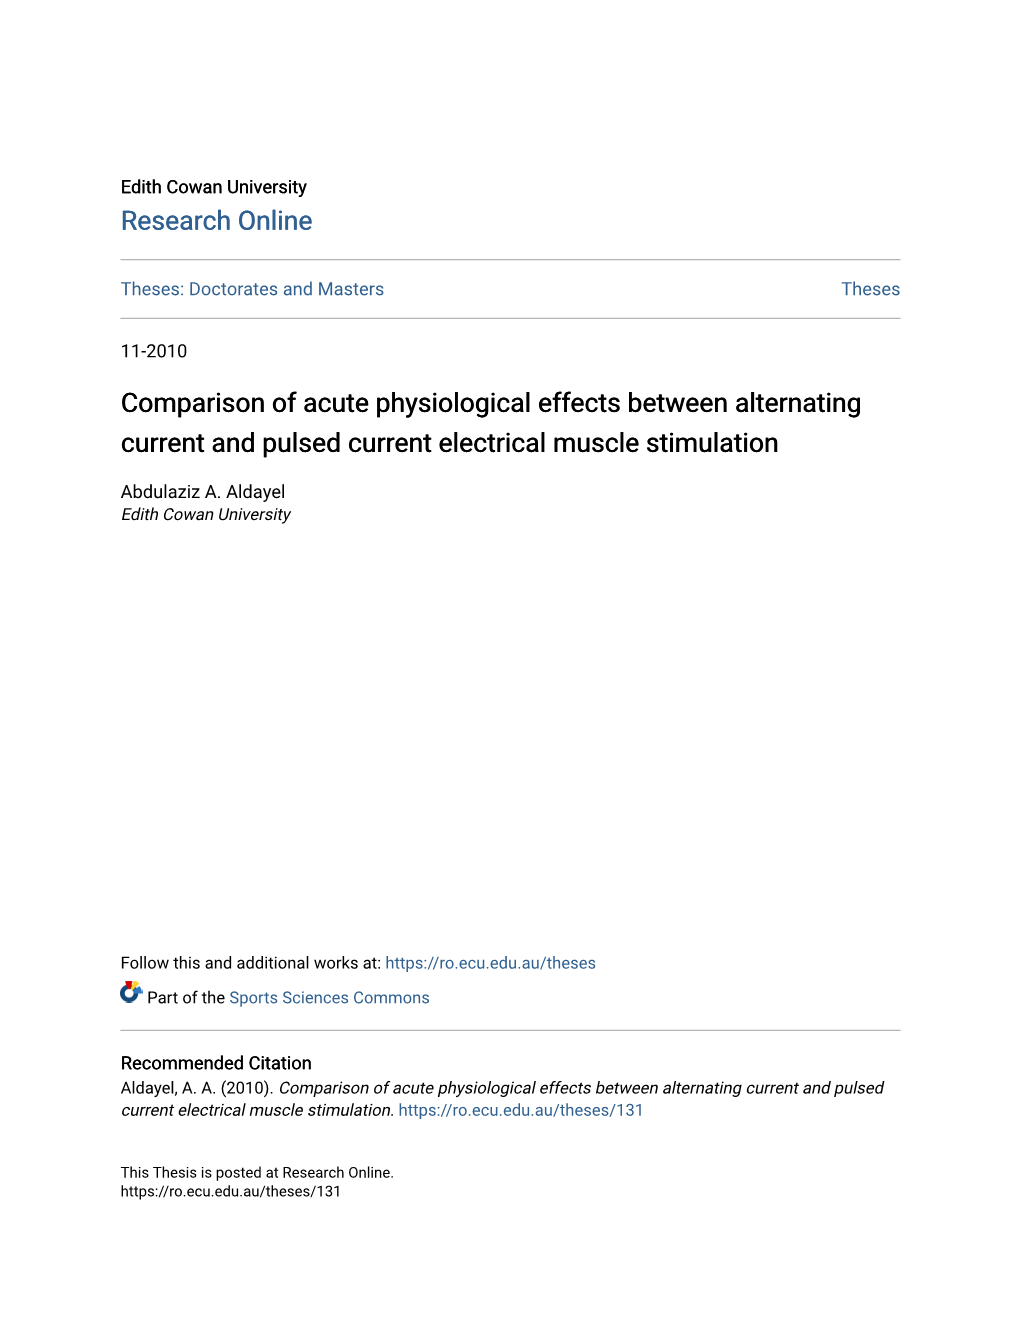 Comparison of Acute Physiological Effects Between Alternating Current and Pulsed Current Electrical Muscle Stimulation